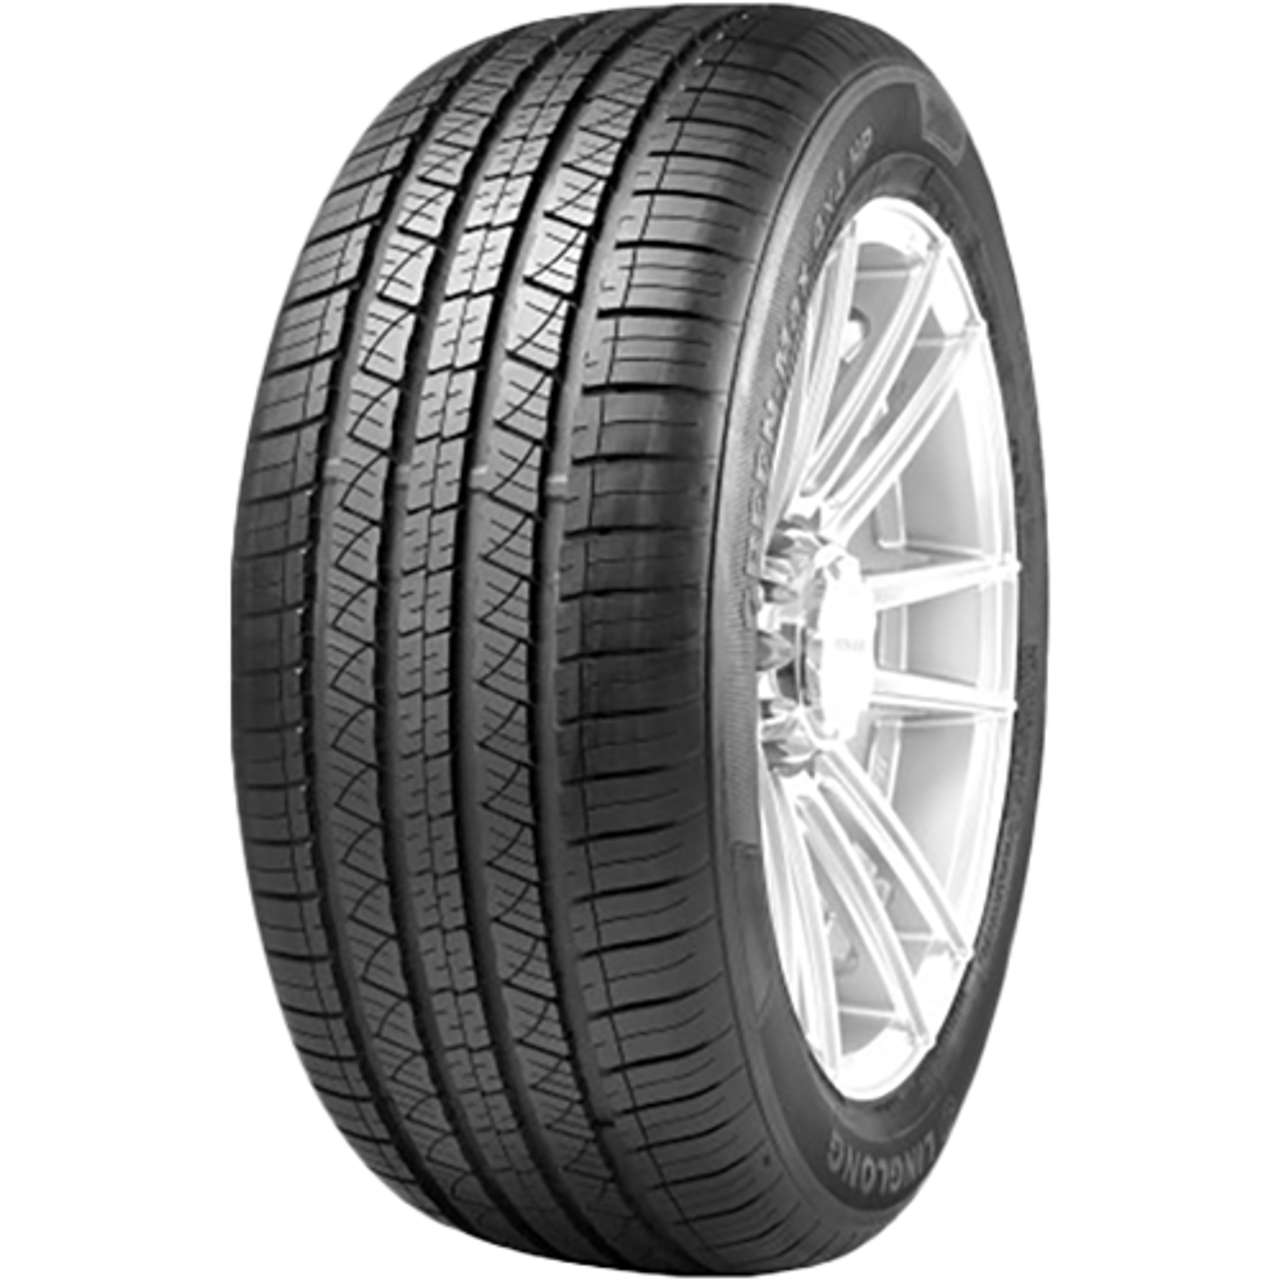 LINGLONG GREEN-MAX 4X4 HP 275/40R22 107W BSW